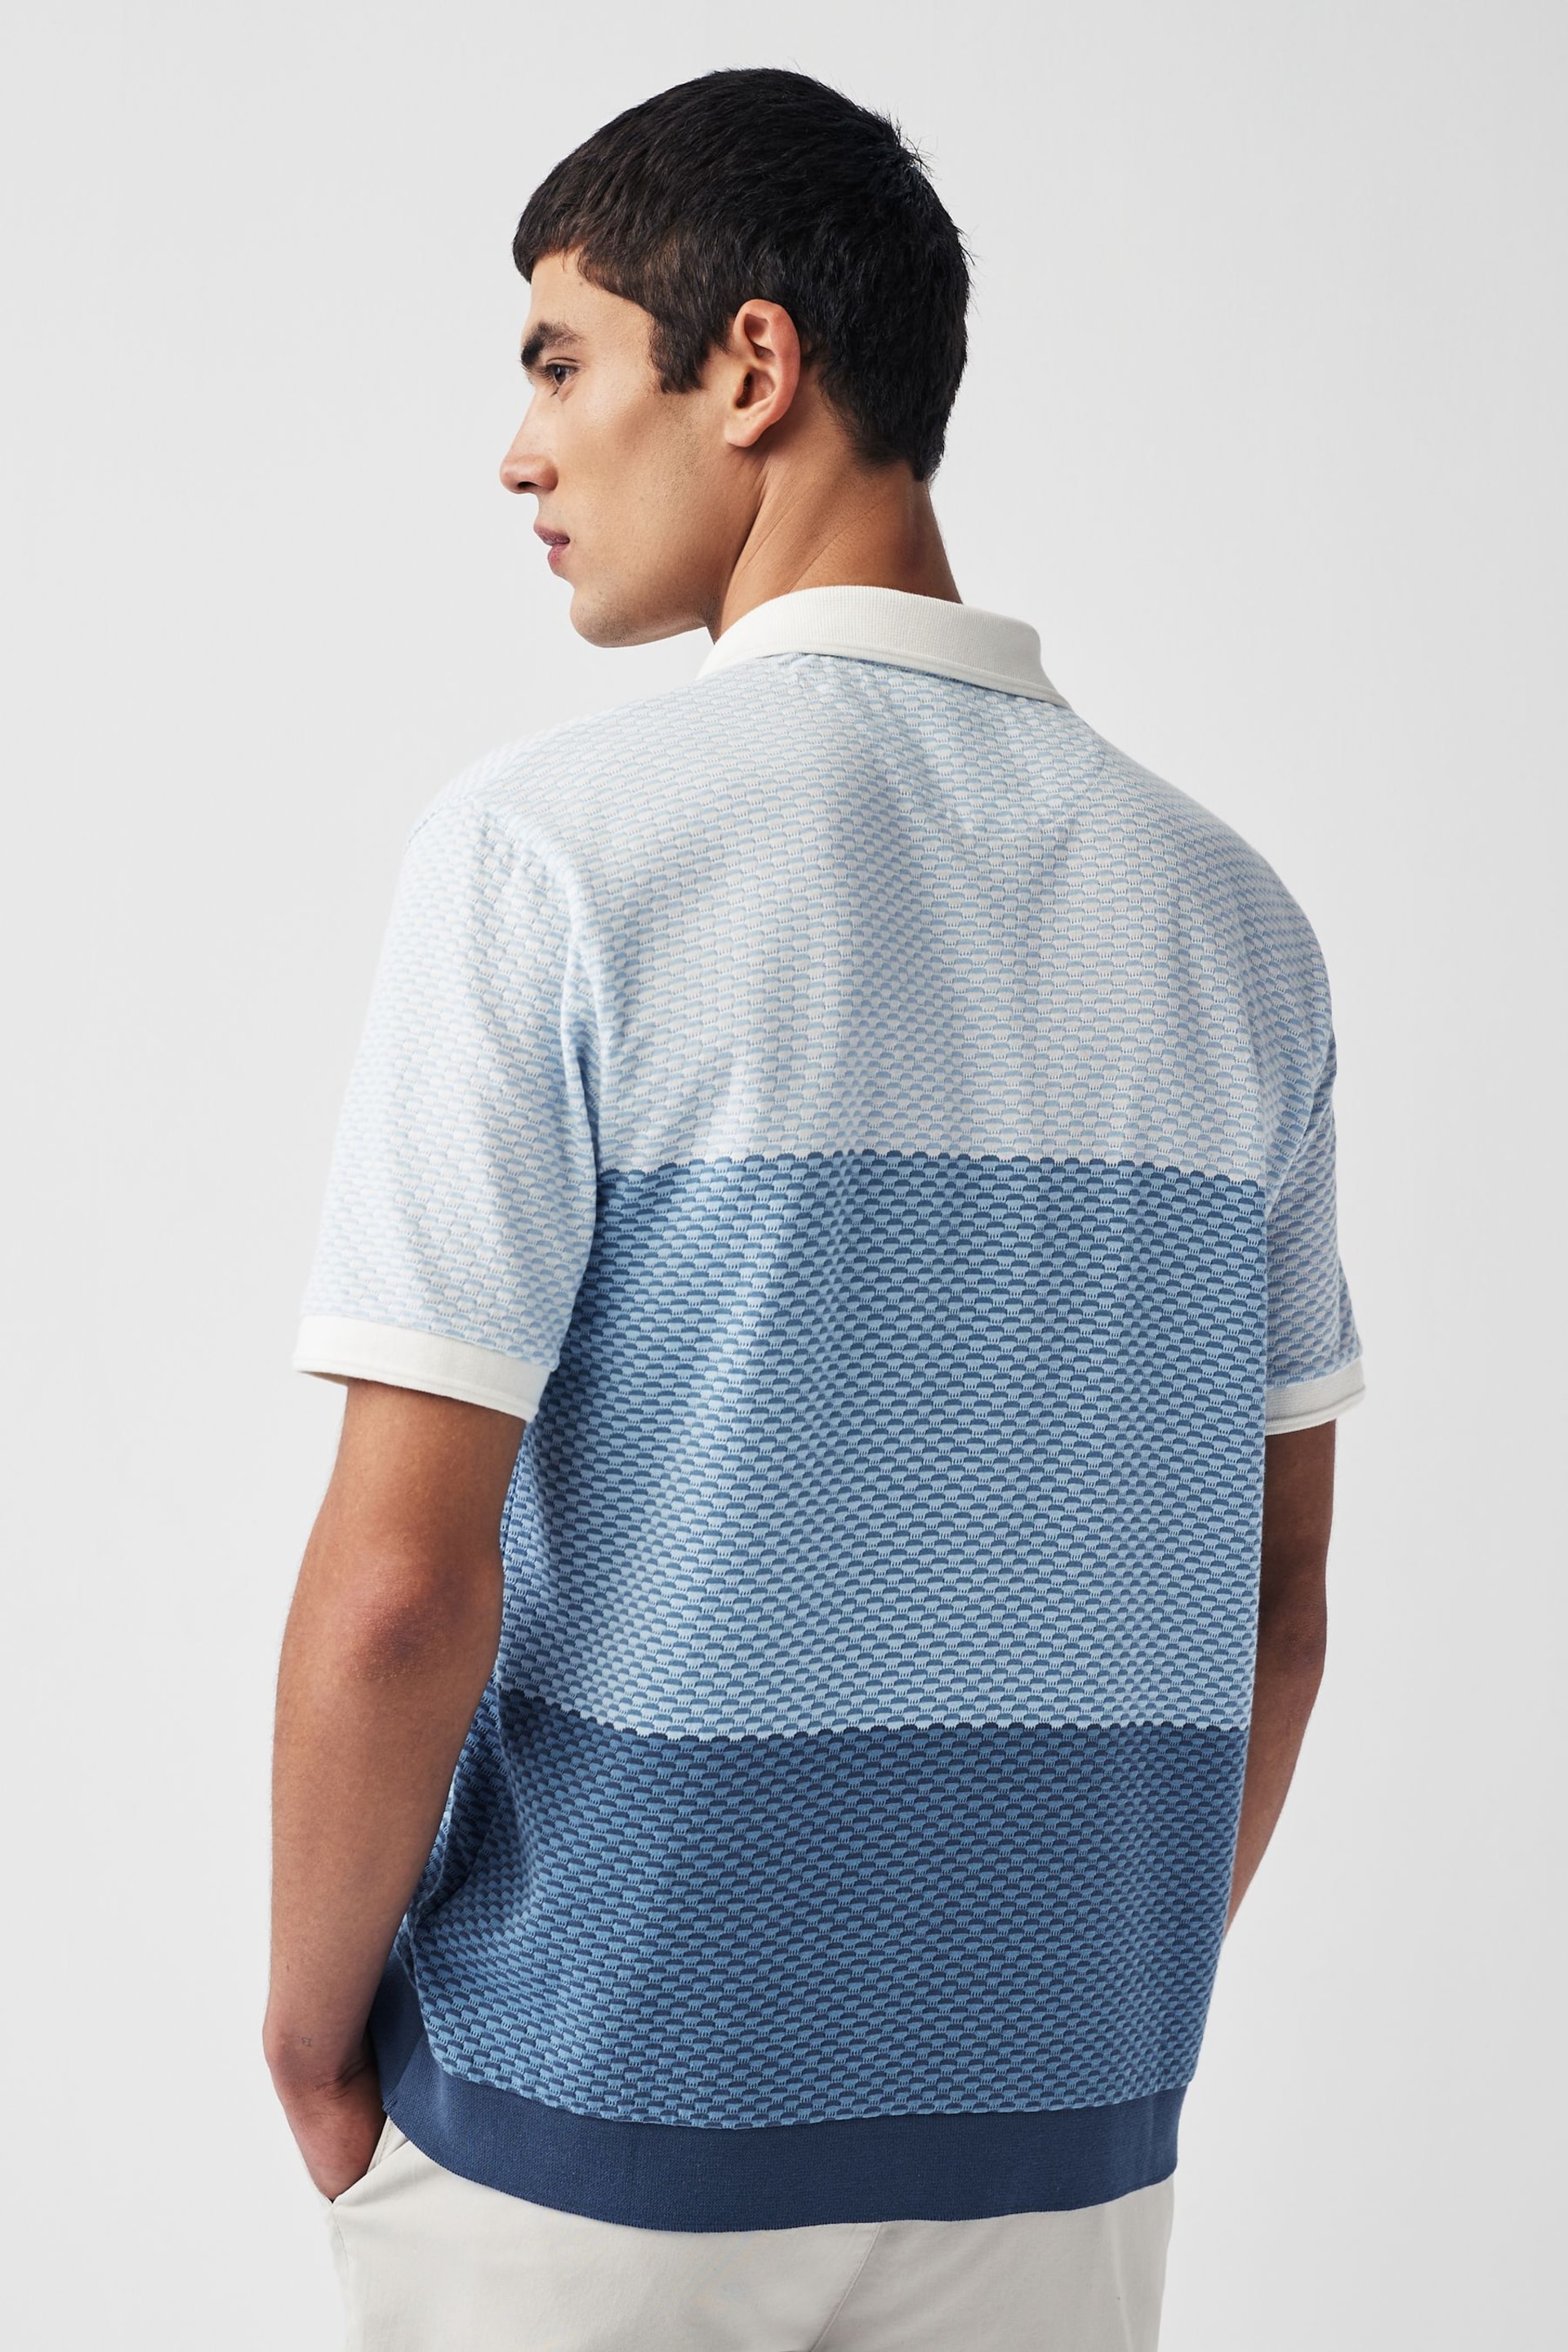 Blue Textured Colour Block Polo Shirt - Image 3 of 8